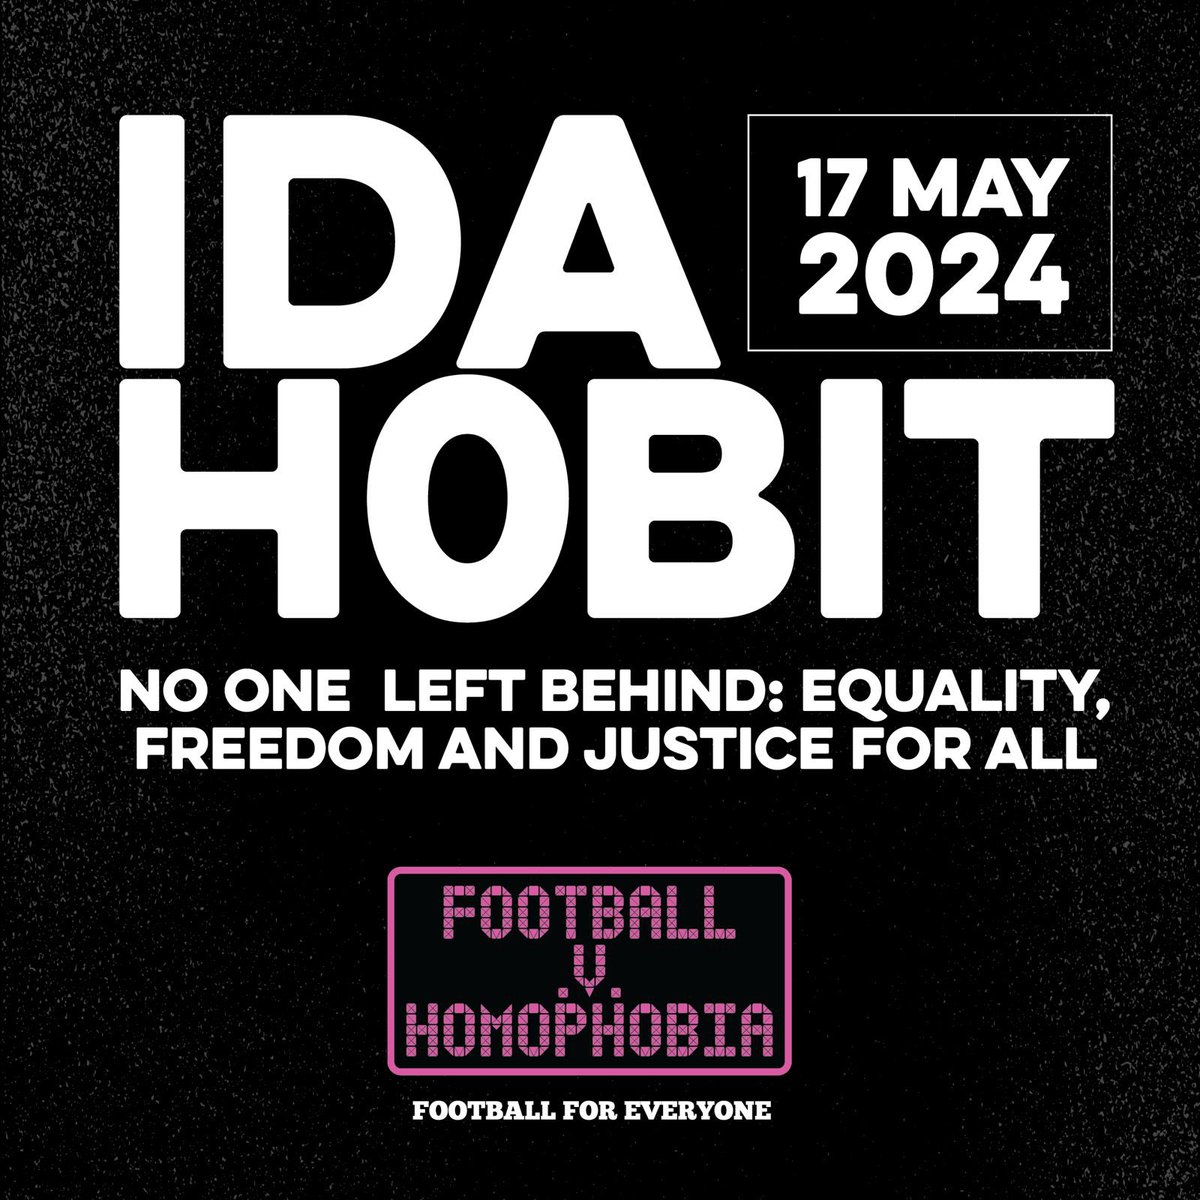 Today is #IDAHOBIT2024 & we stand against anti-LGBTIQ+ discrimination and hate! We stand together with our friends & partners to drive inclusion of LGBTIQ+ people in football & to demand equality in the game. Football is for everyone and no one should be left behind 🤝🏳️‍⚧️🏳️‍🌈⚽️